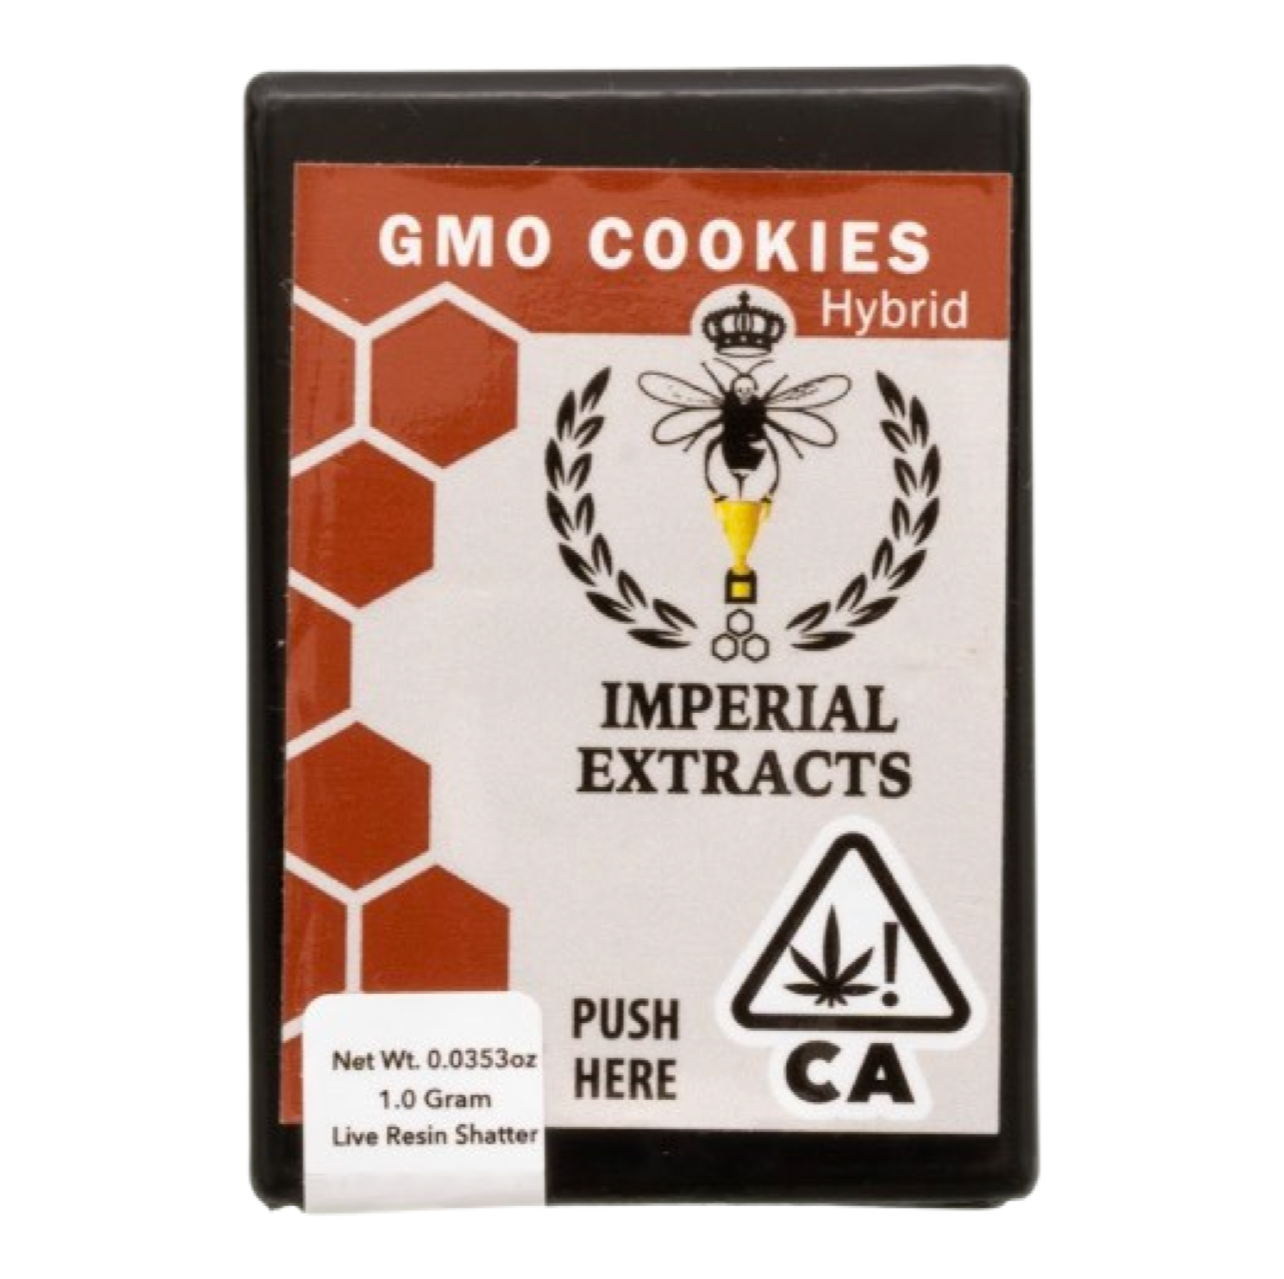 1 Gram Live Resin Shatter by Imperial Extracts | GMO Cookies | Hybrid